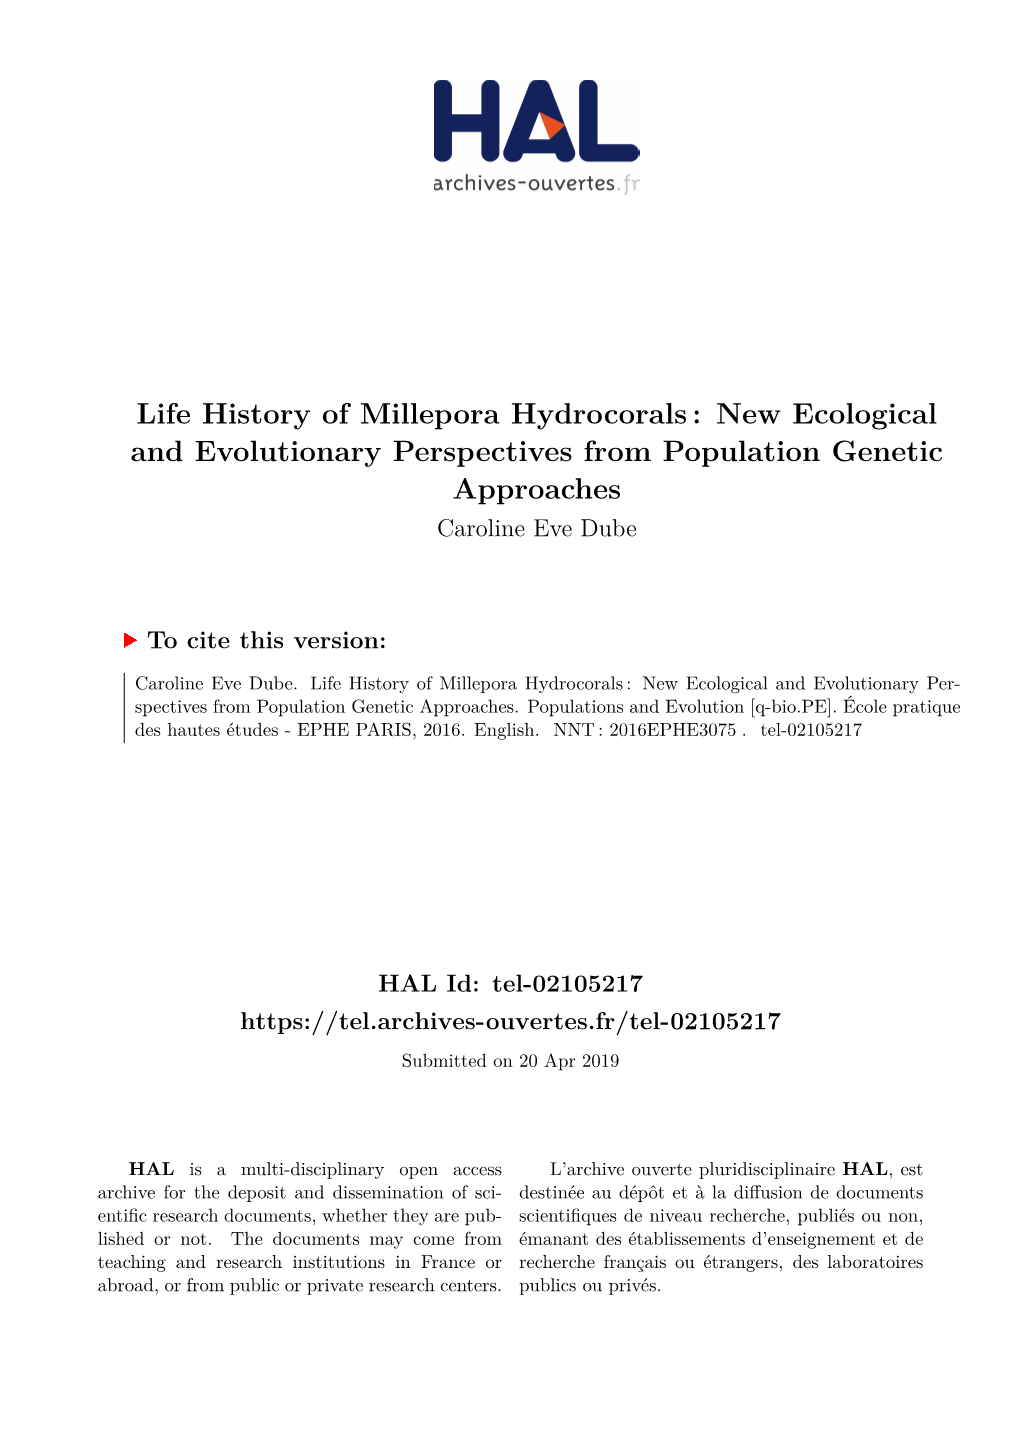 Life History of Millepora Hydrocorals : New Ecological and Evolutionary Perspectives from Population Genetic Approaches Caroline Eve Dube